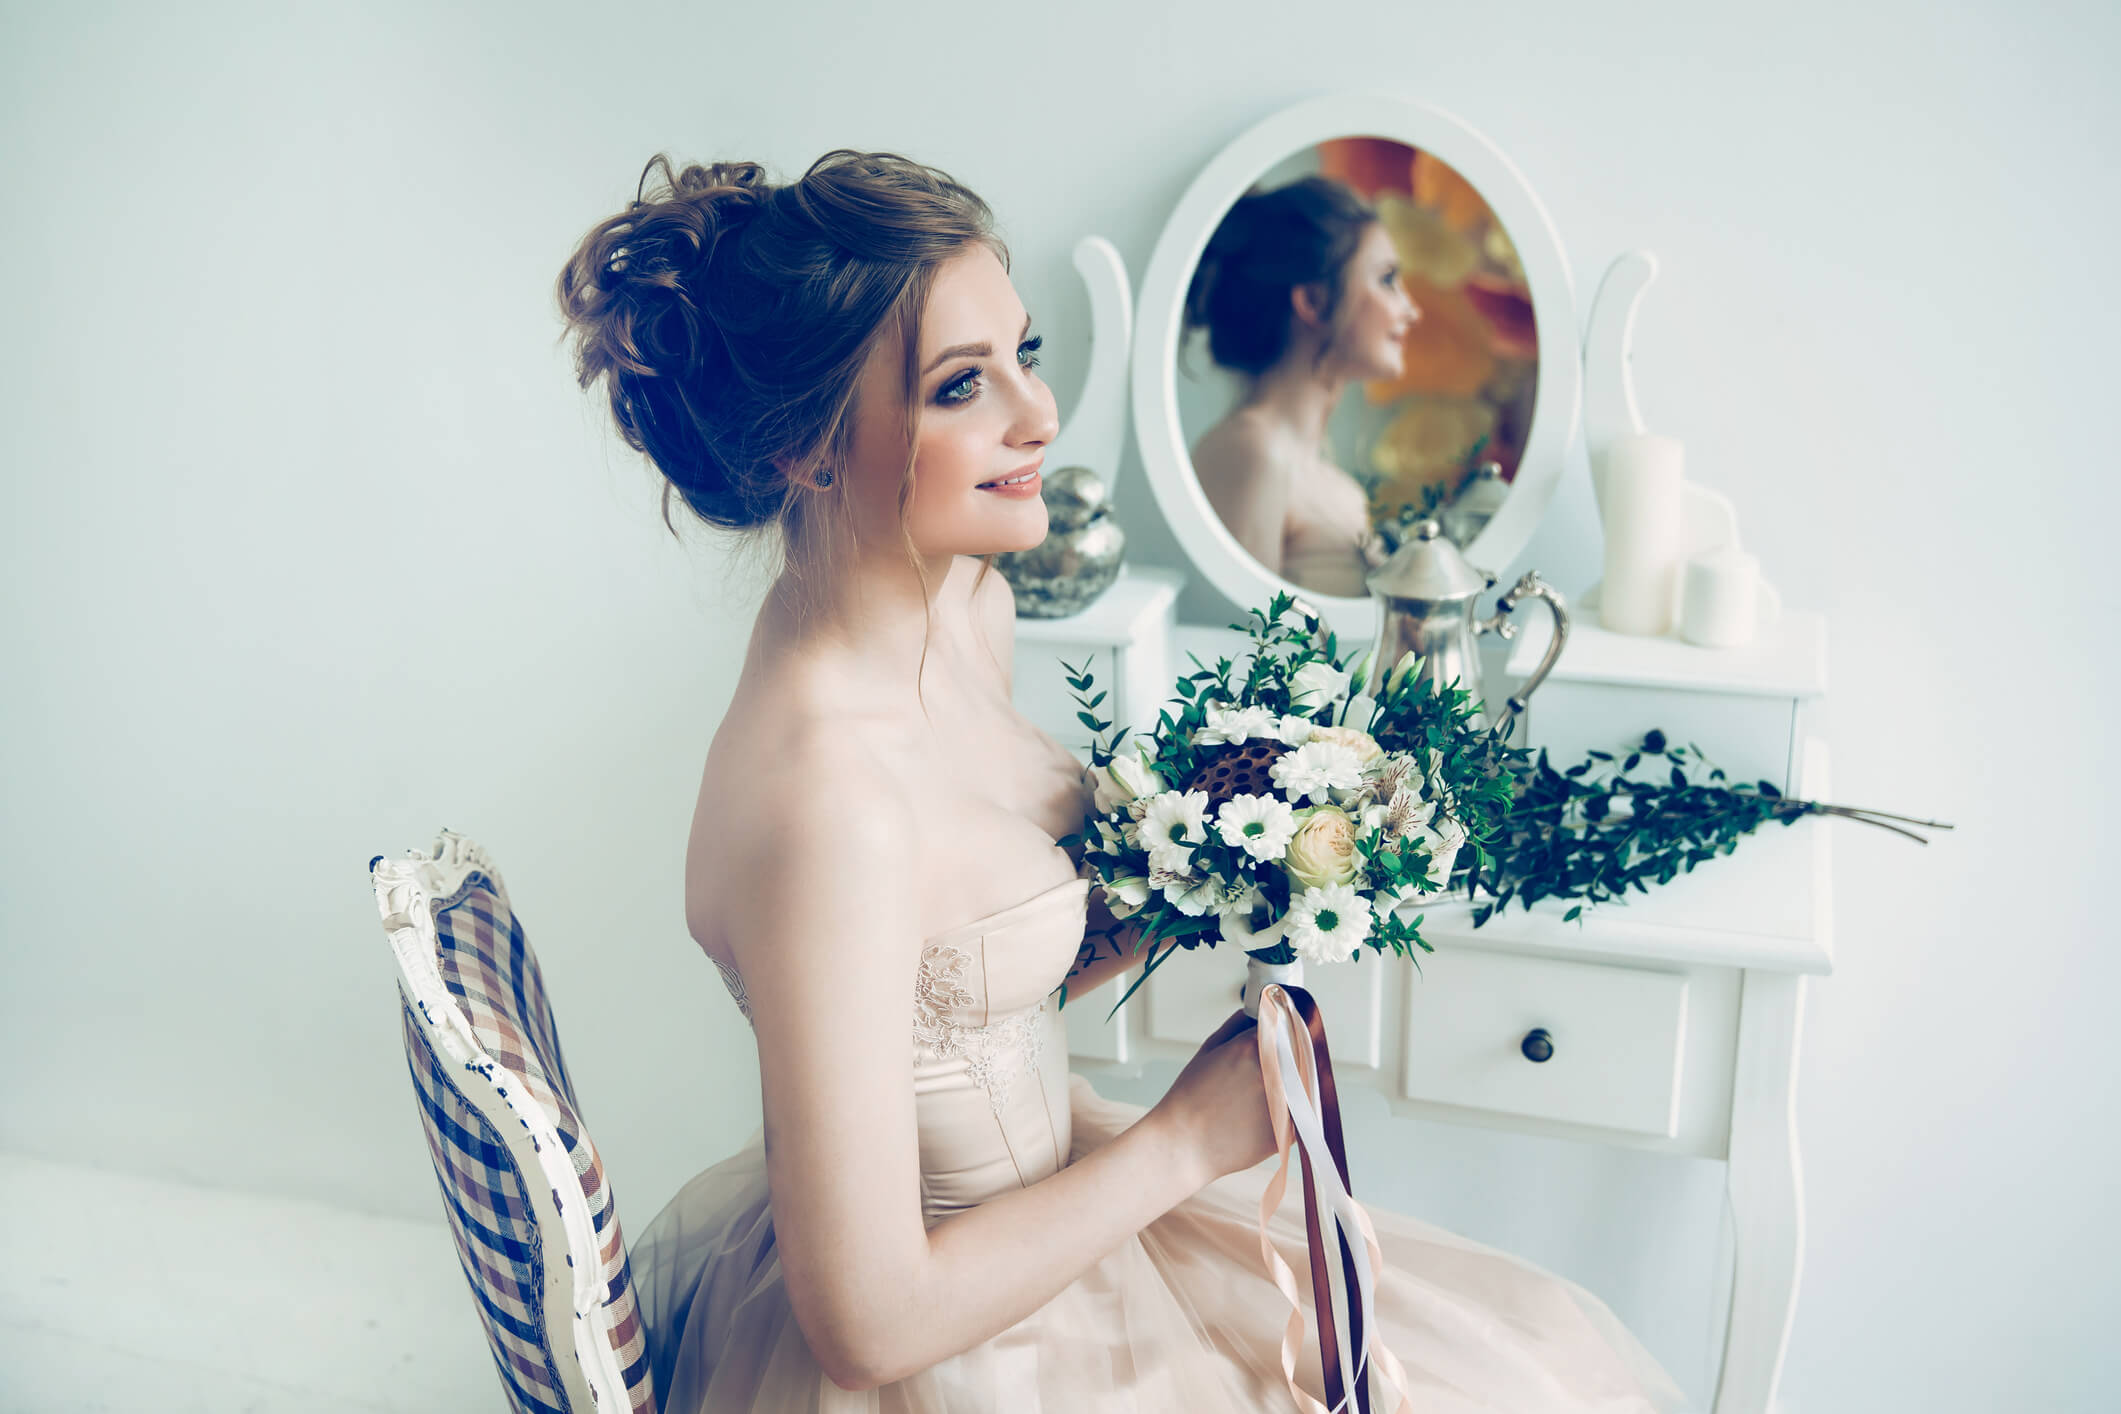 Image of a bride with styled hair and holding a bouquet 